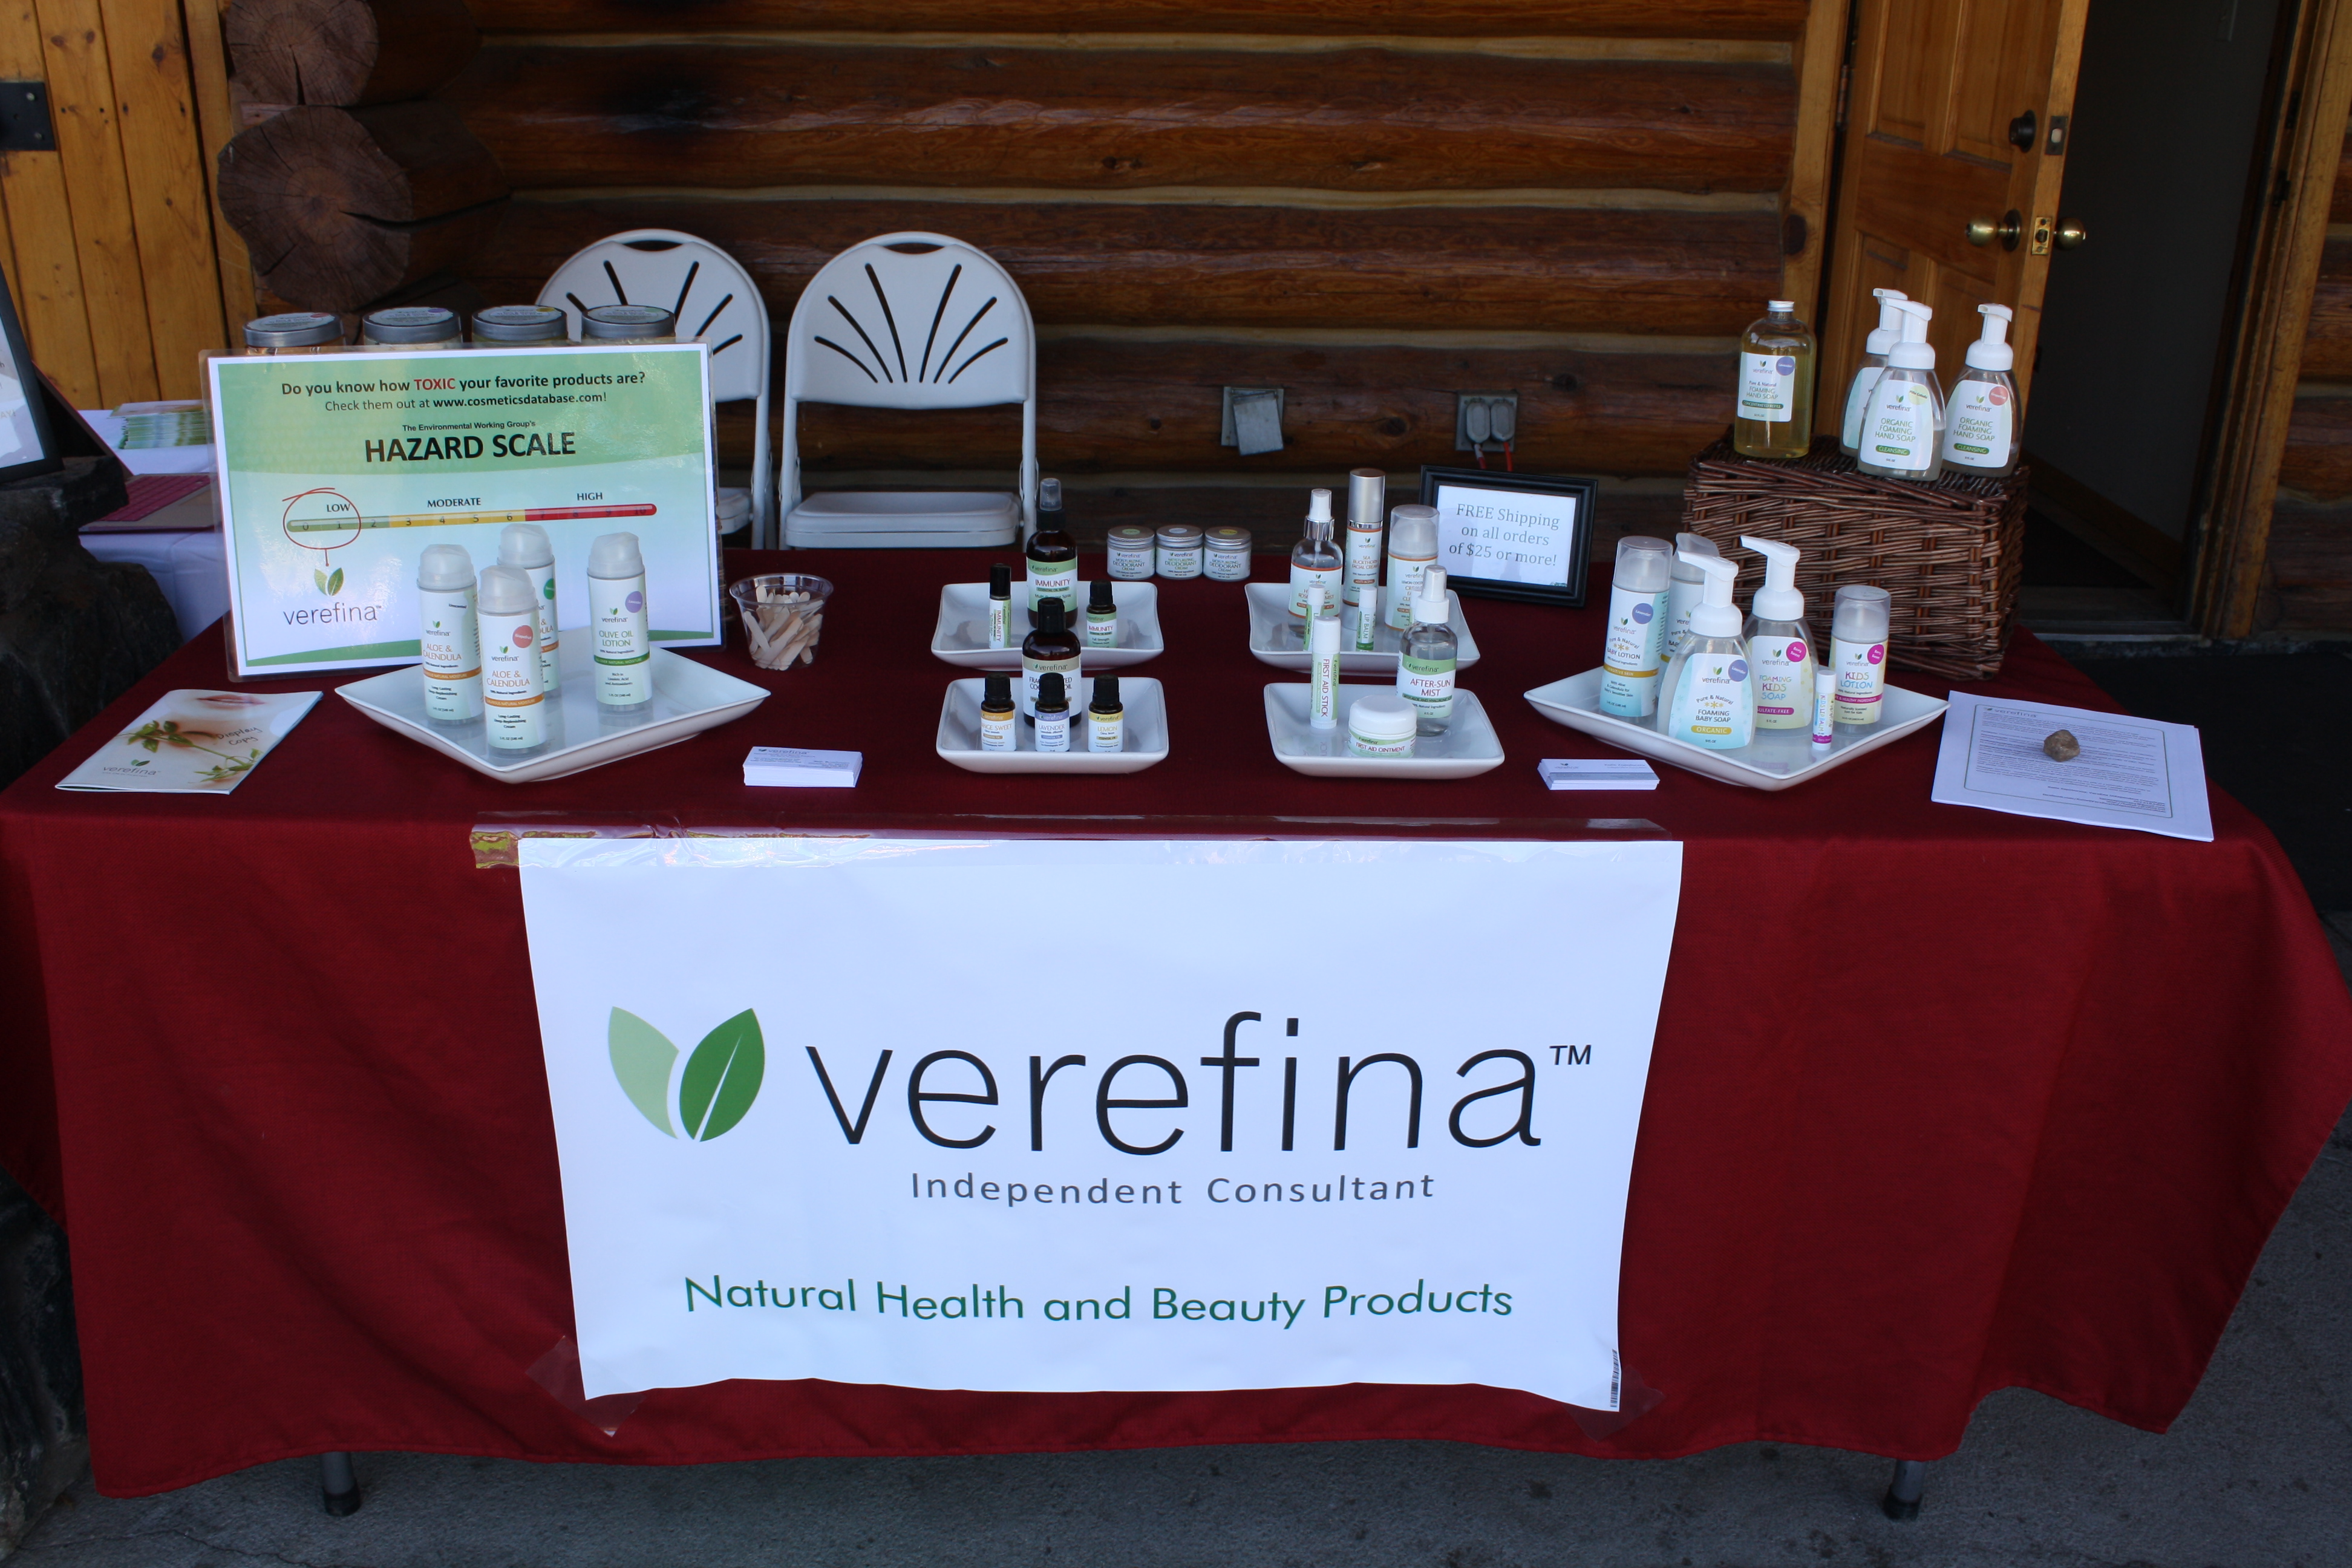 Set up for one of the first events I did as a Verefina consultant.